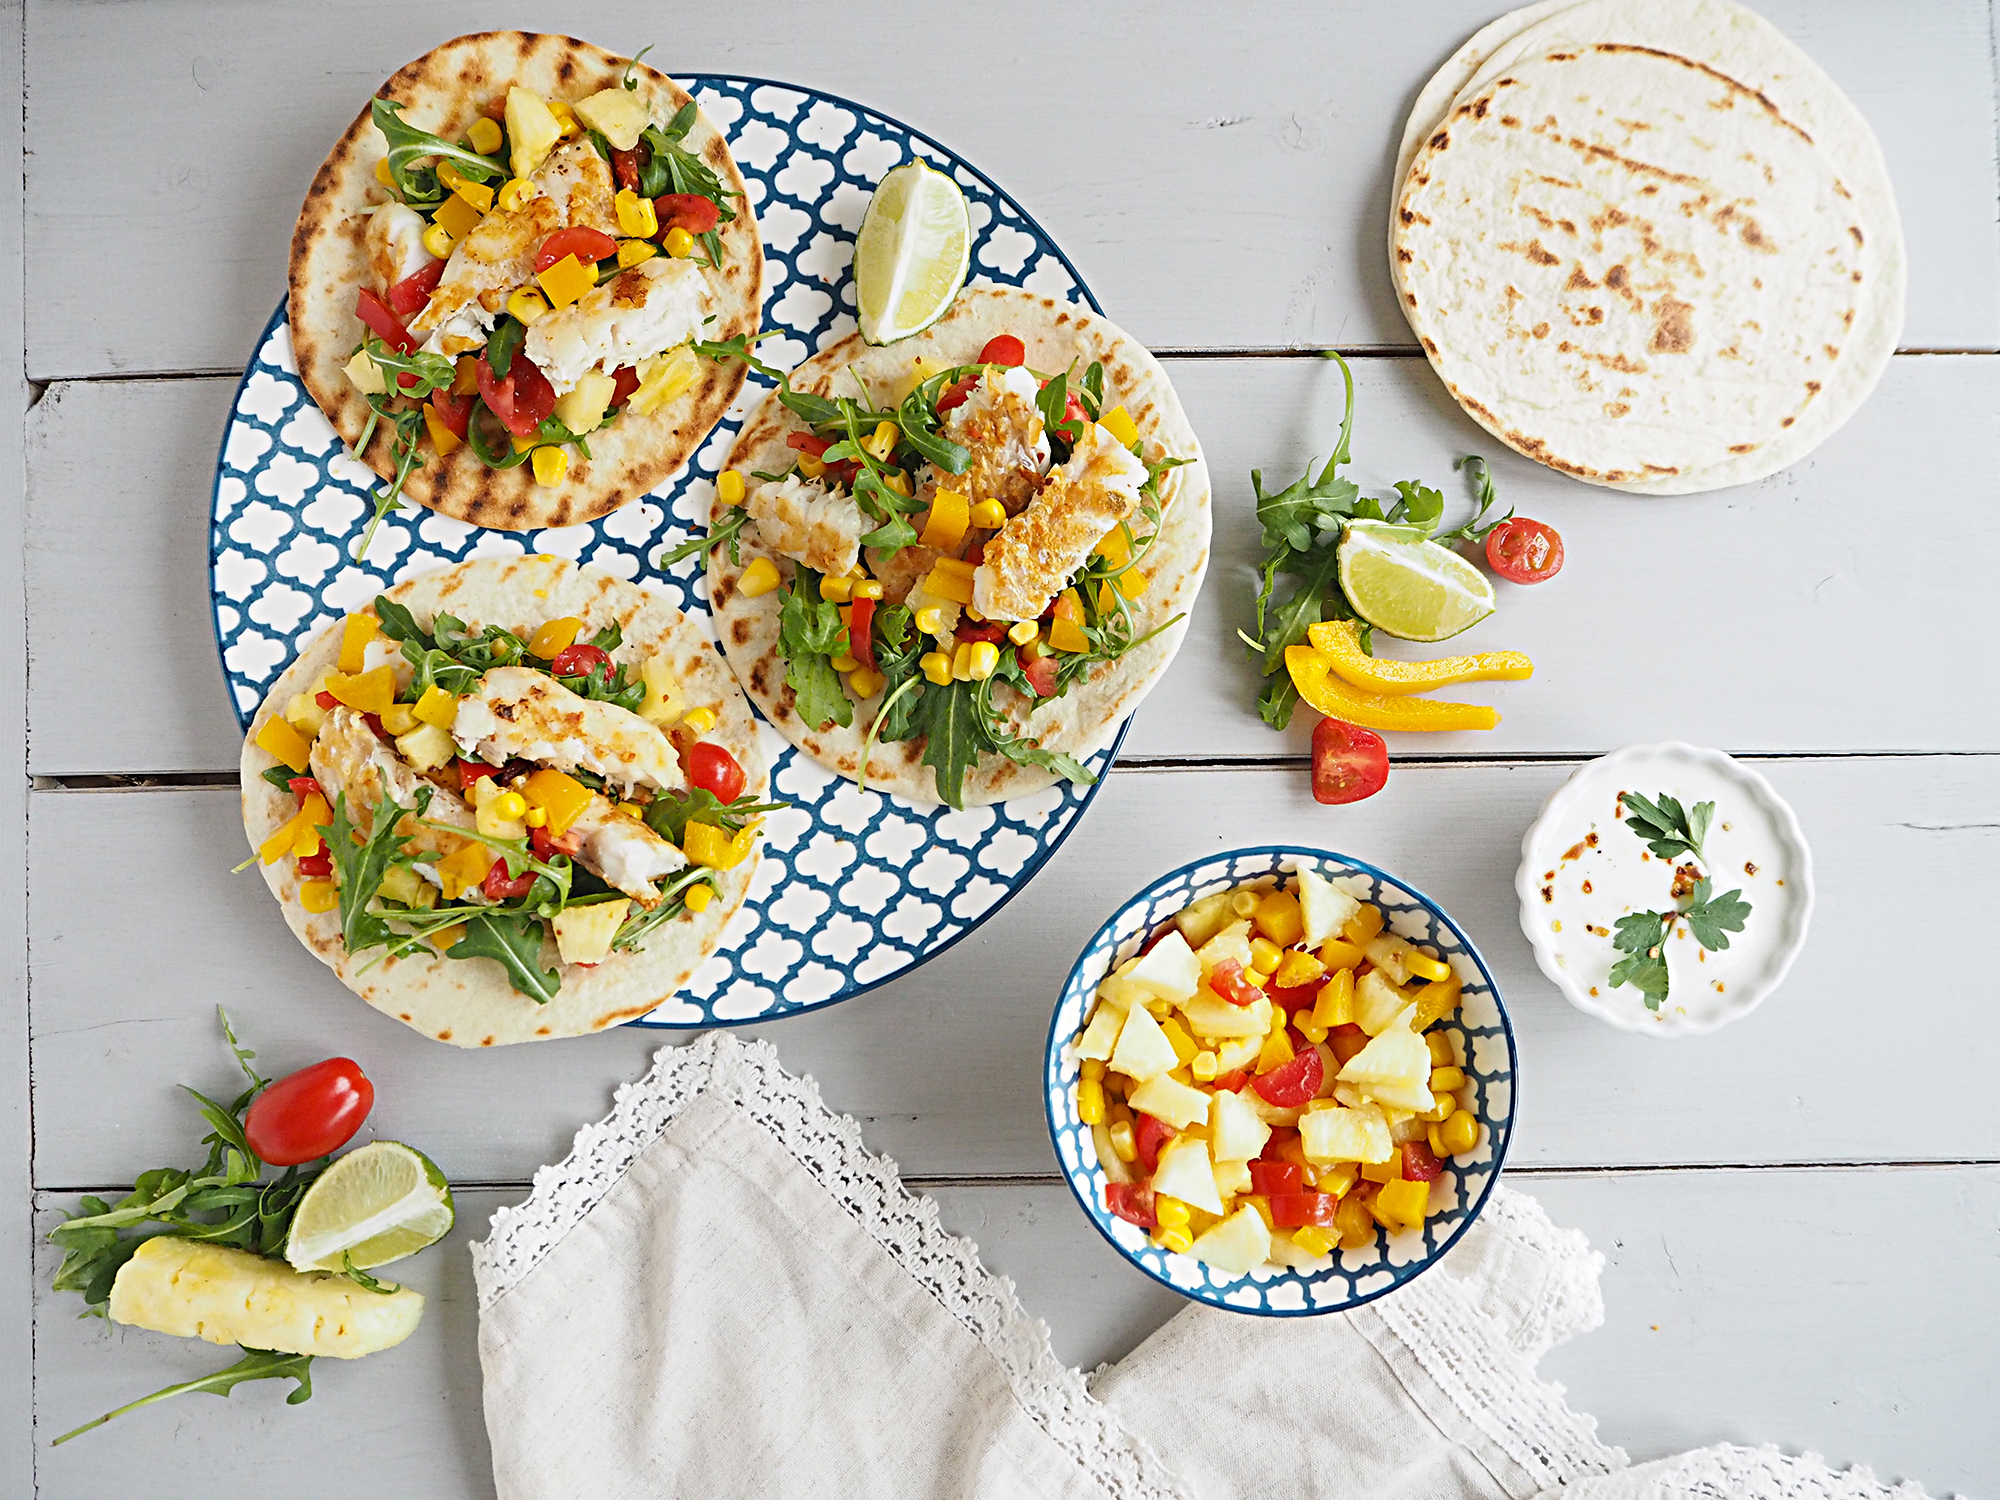 A plate of fish tacos with pineapple salsa, next to a bowl of salsa, more tortillas and some natural yoghurt.